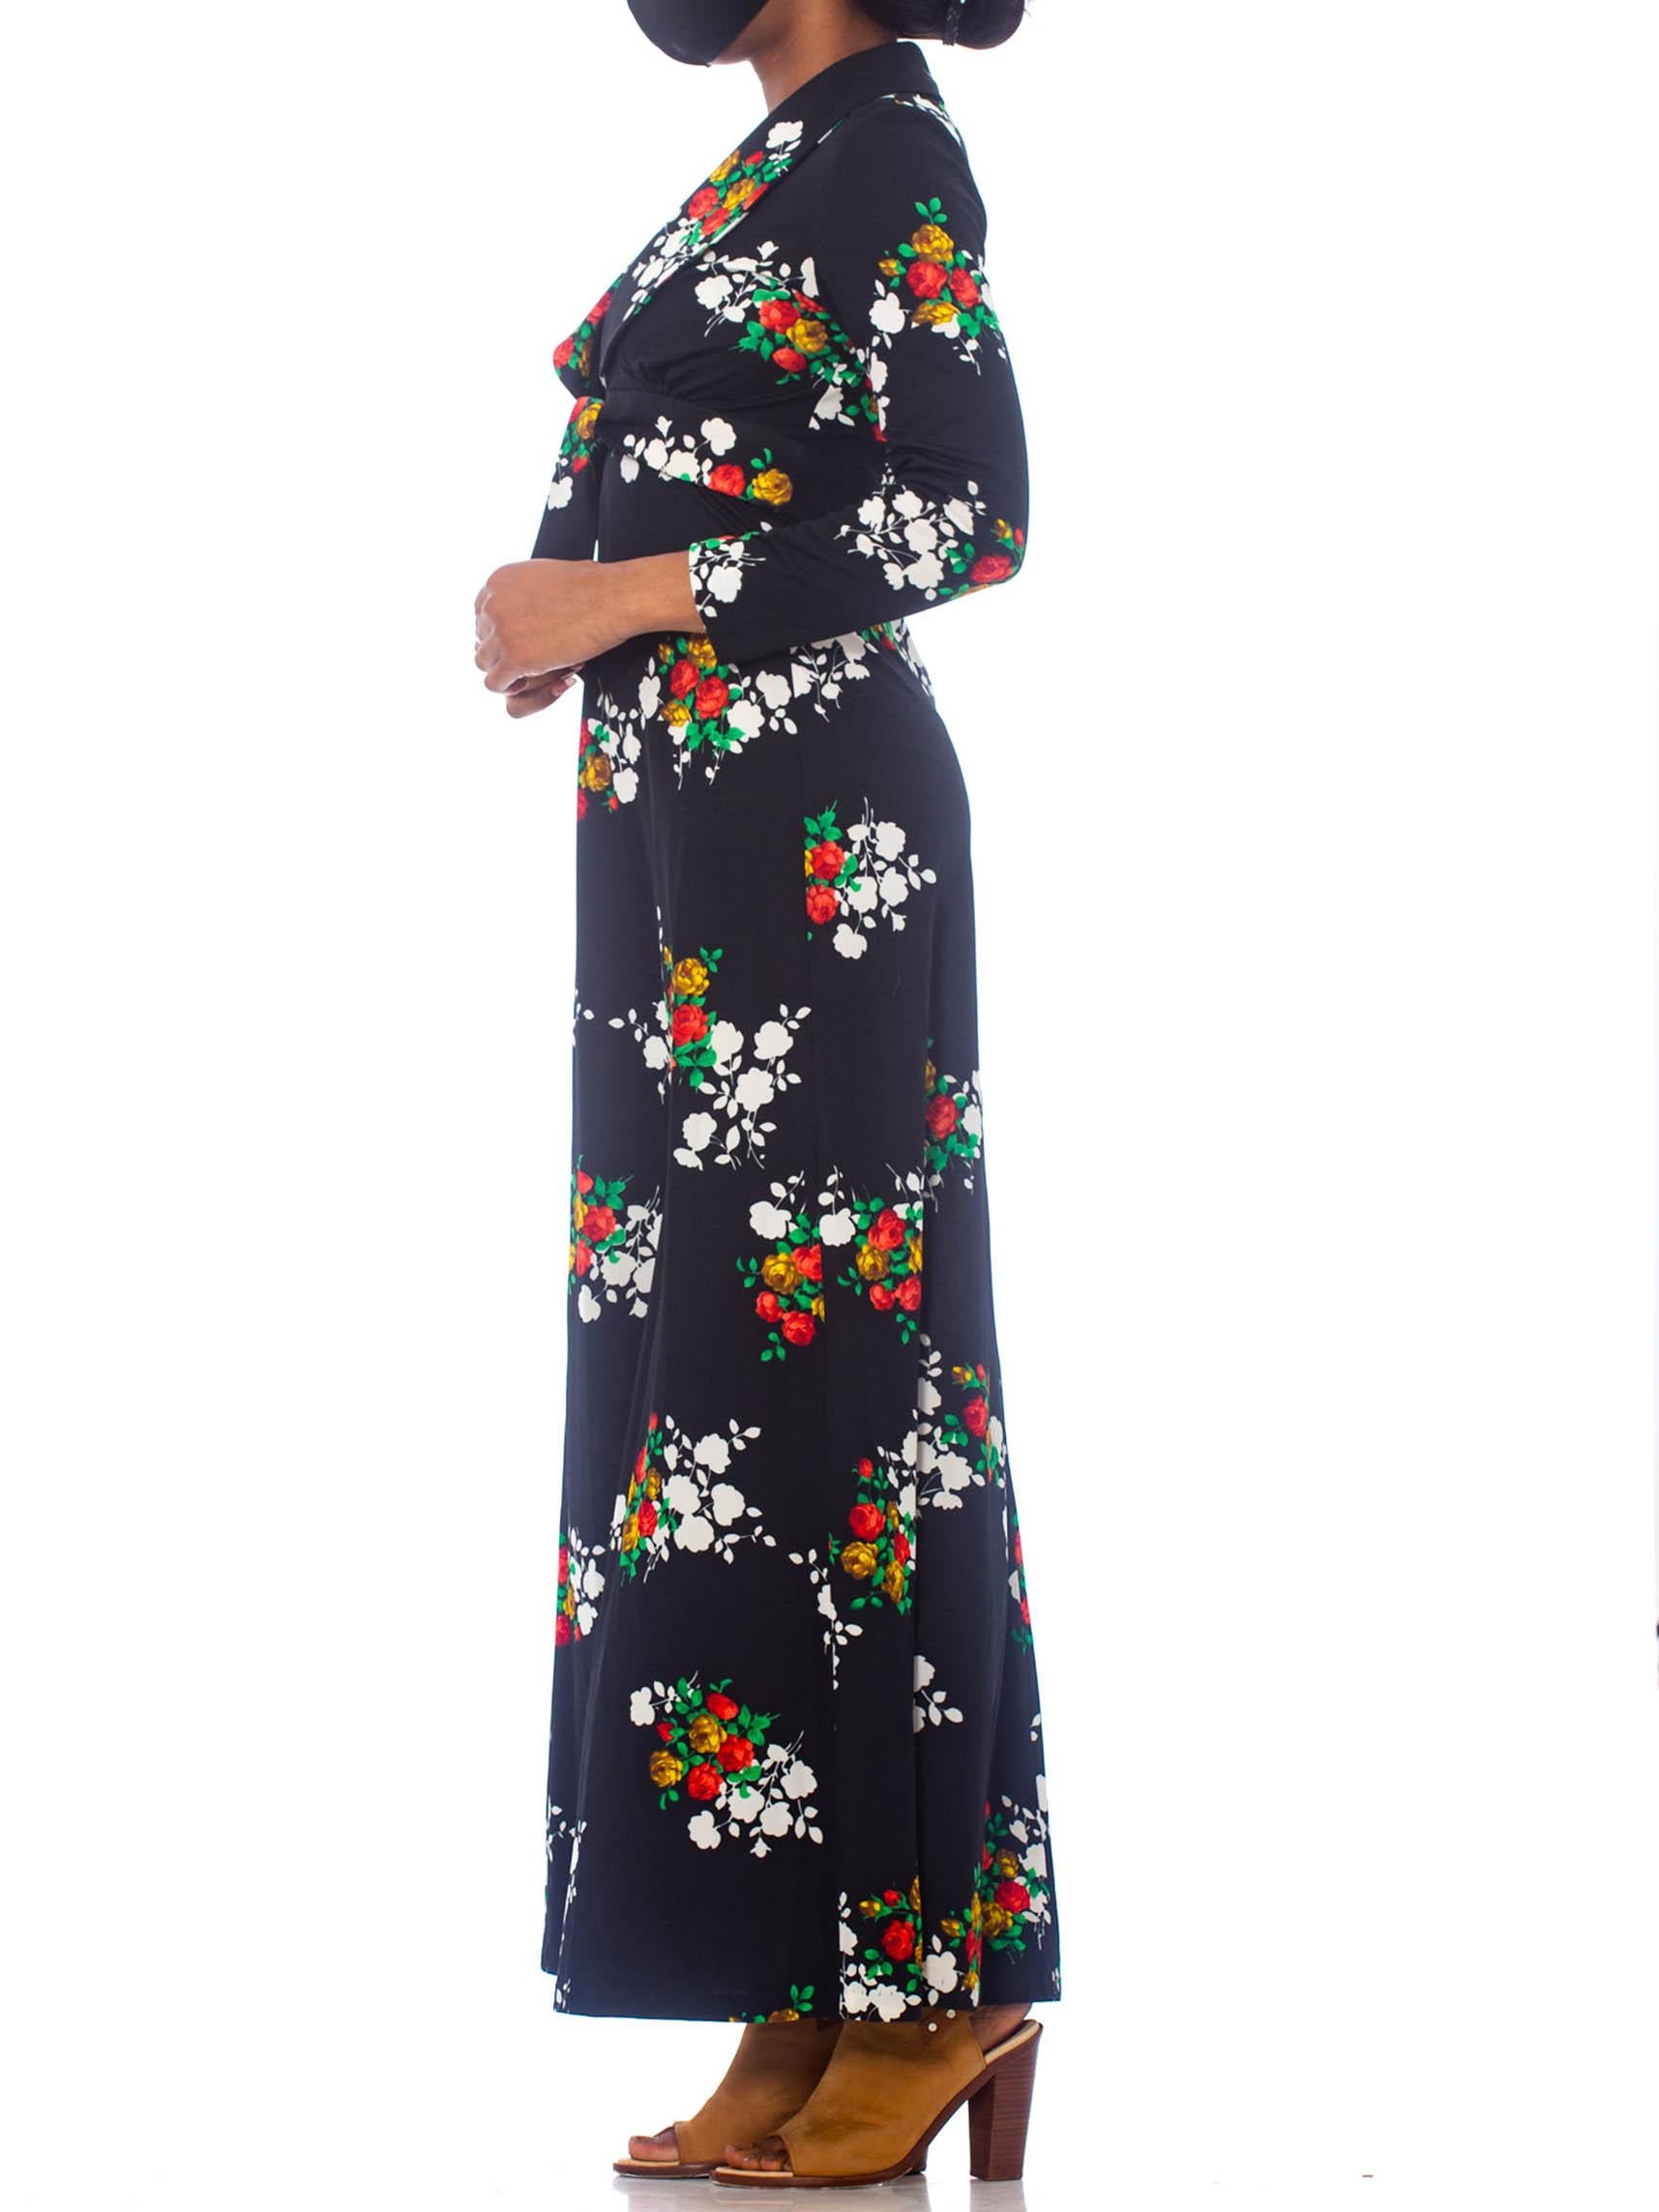 Women's 1970'S Black Polyester Jersey Rose Print Halter Disco Dress With Matching Jacket